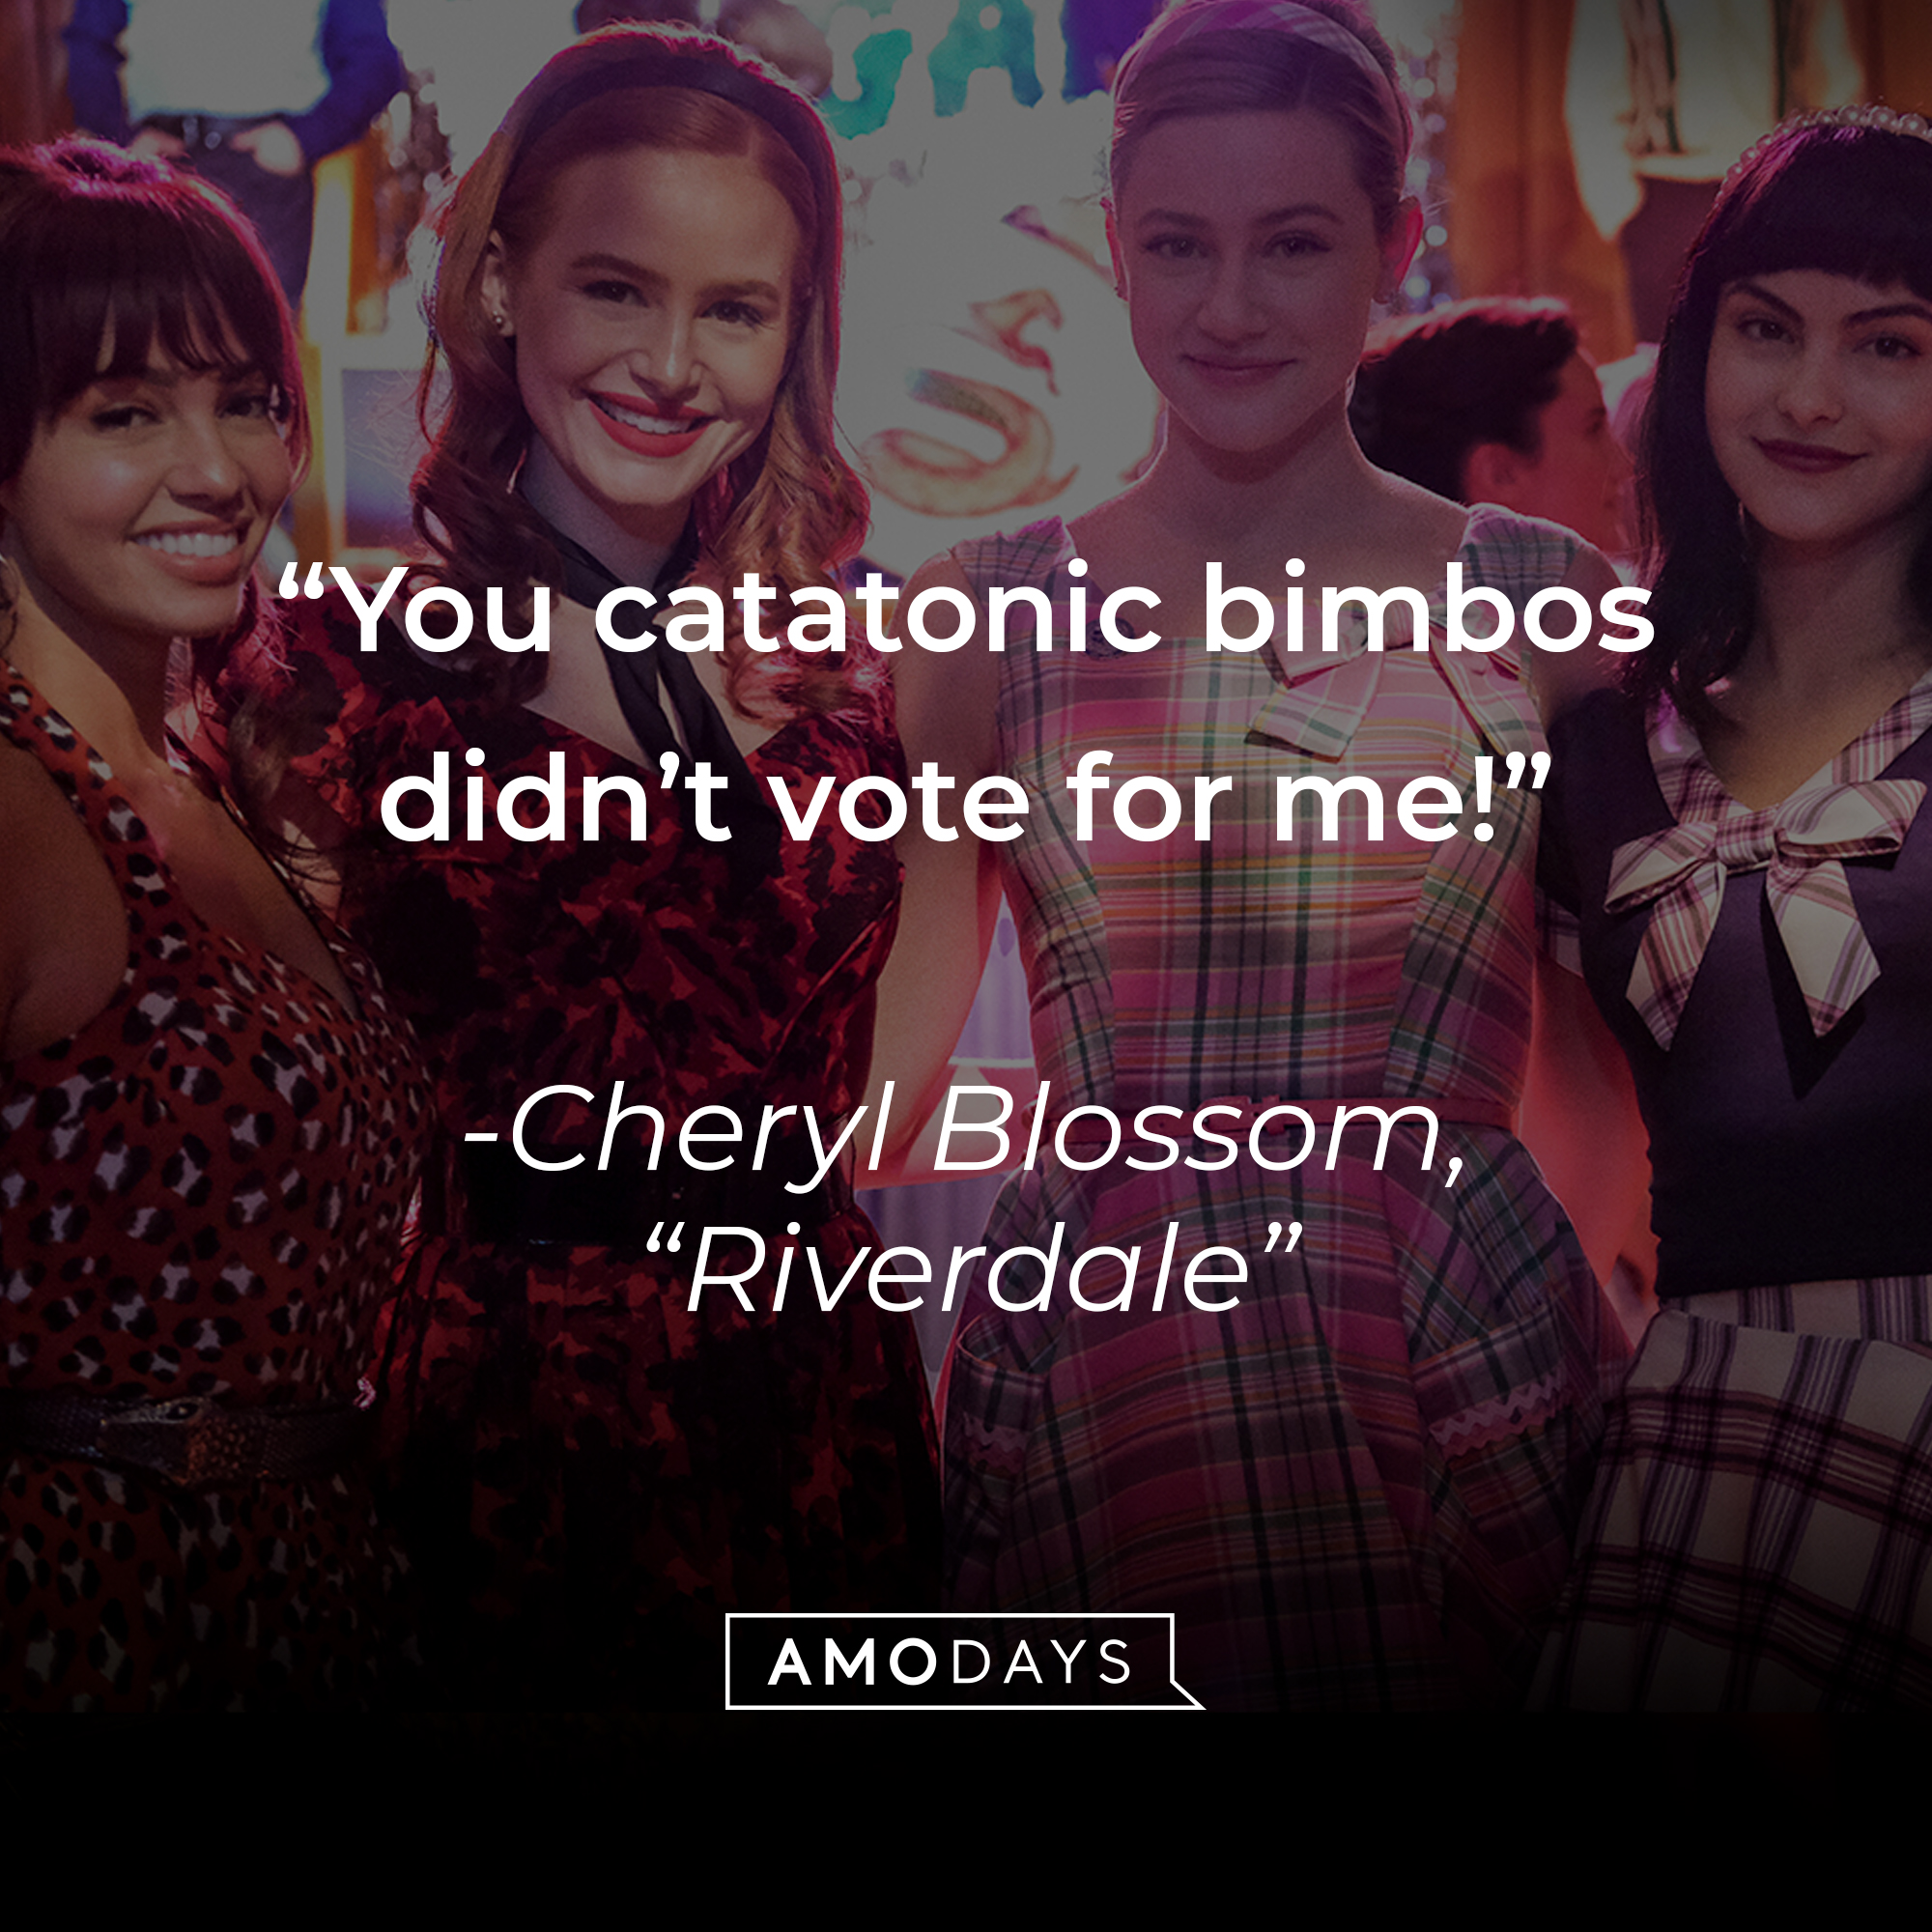 Cheryl Blossom with her quote: "You catatonic bimbos didn’t vote for me!” | Source: Facebook.com/CWRiverdale